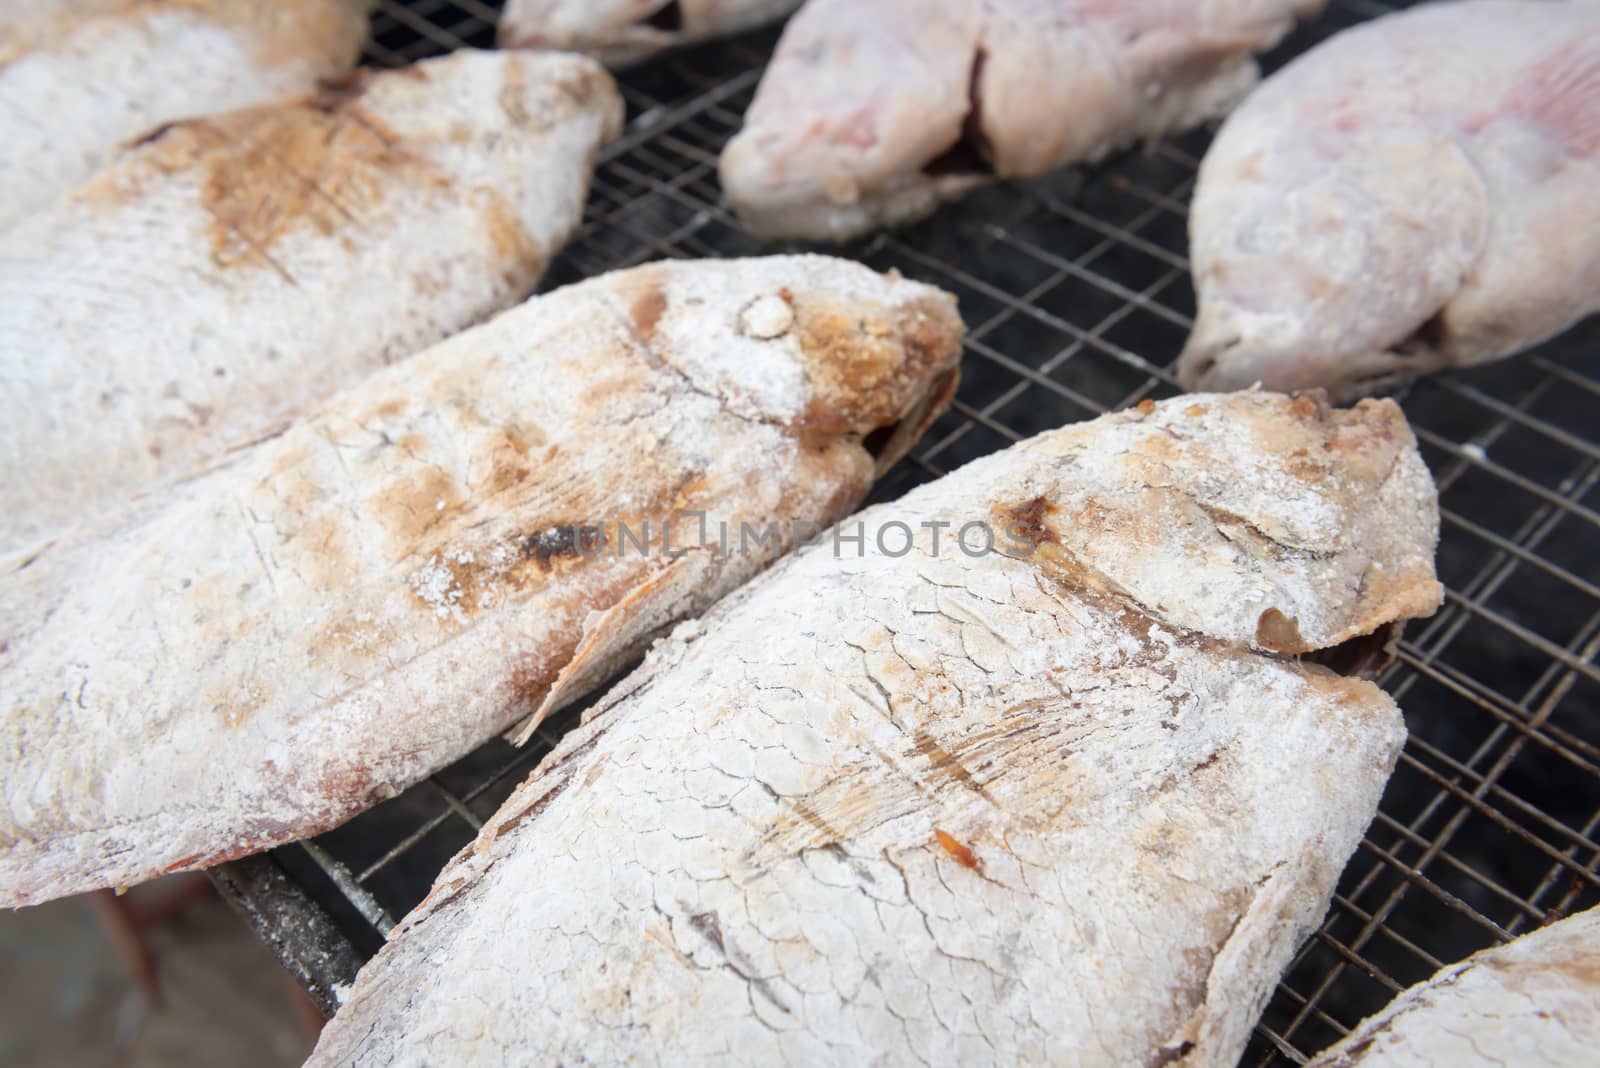 Grilling whole fish in salt on campfire BBQ grate